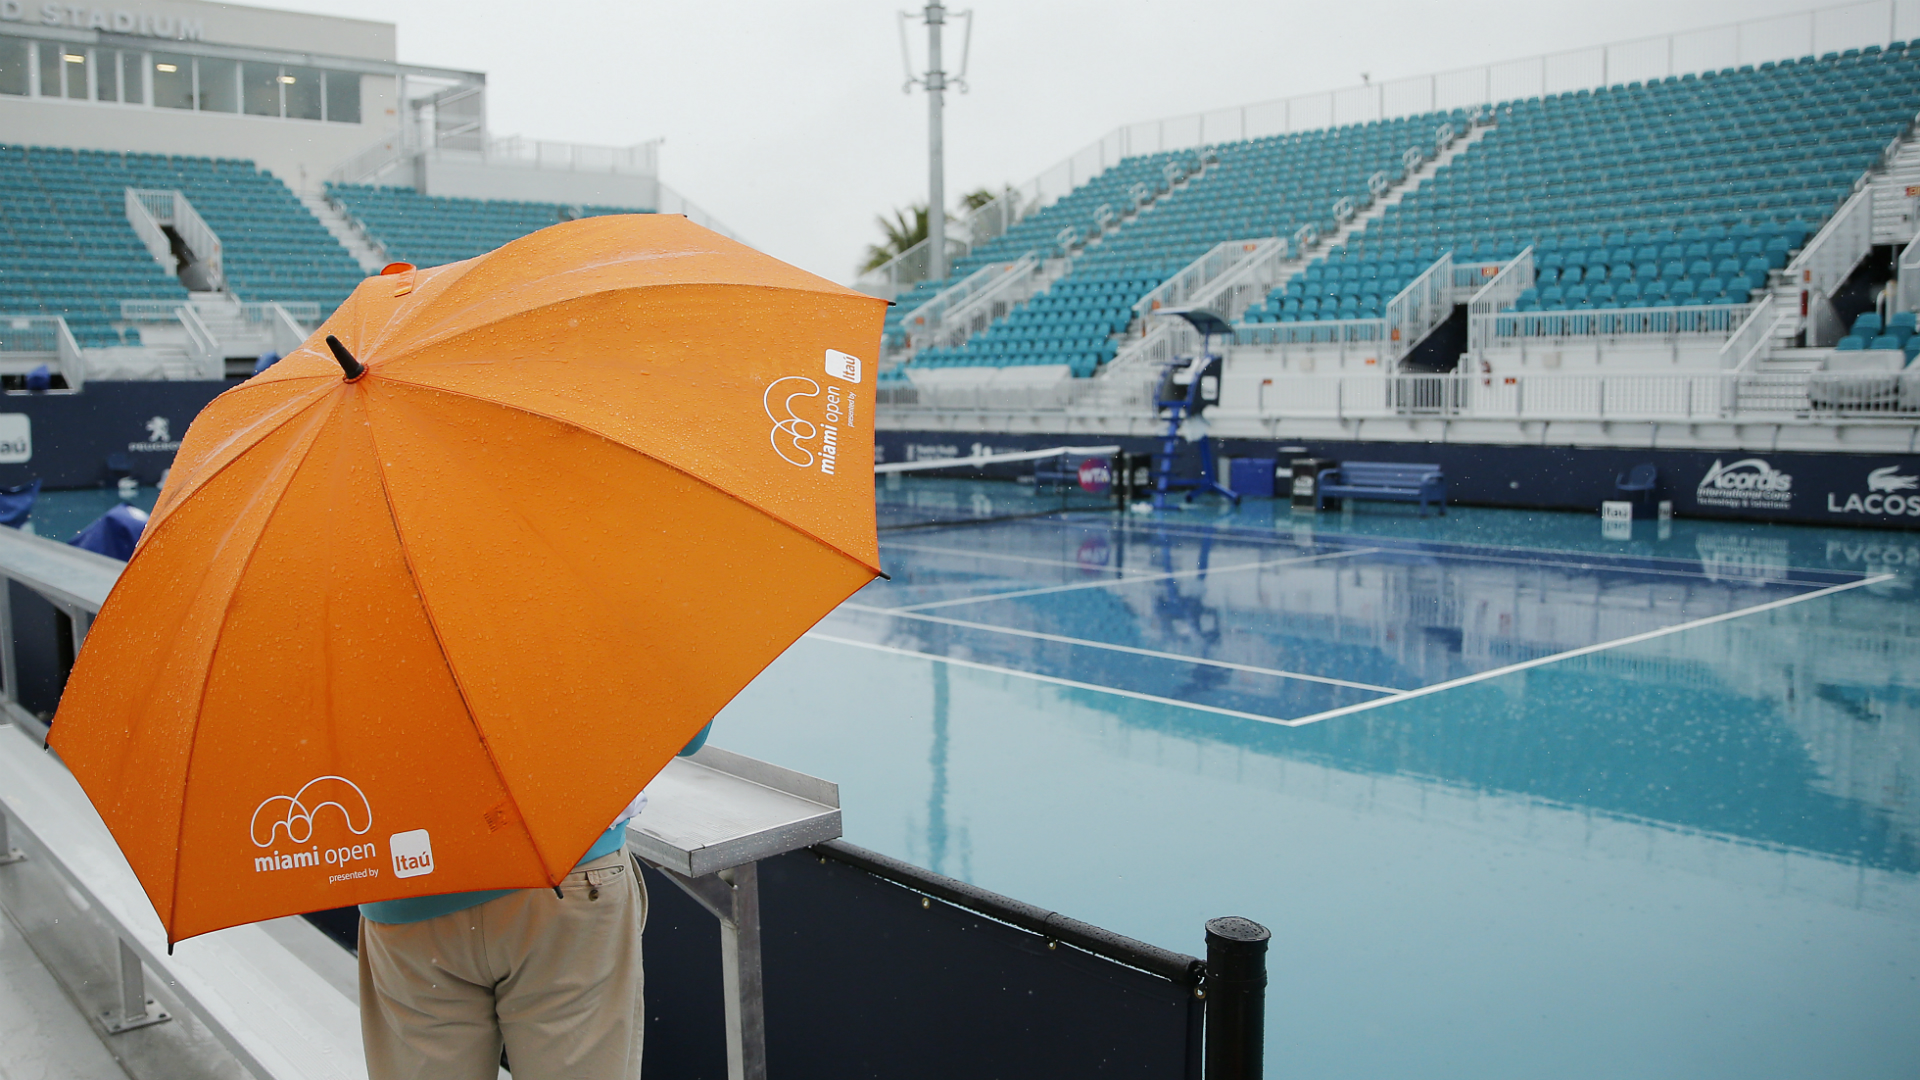 Rain wreaked havoc in Miami, where the WTA schedule was washed out on Tuesday.